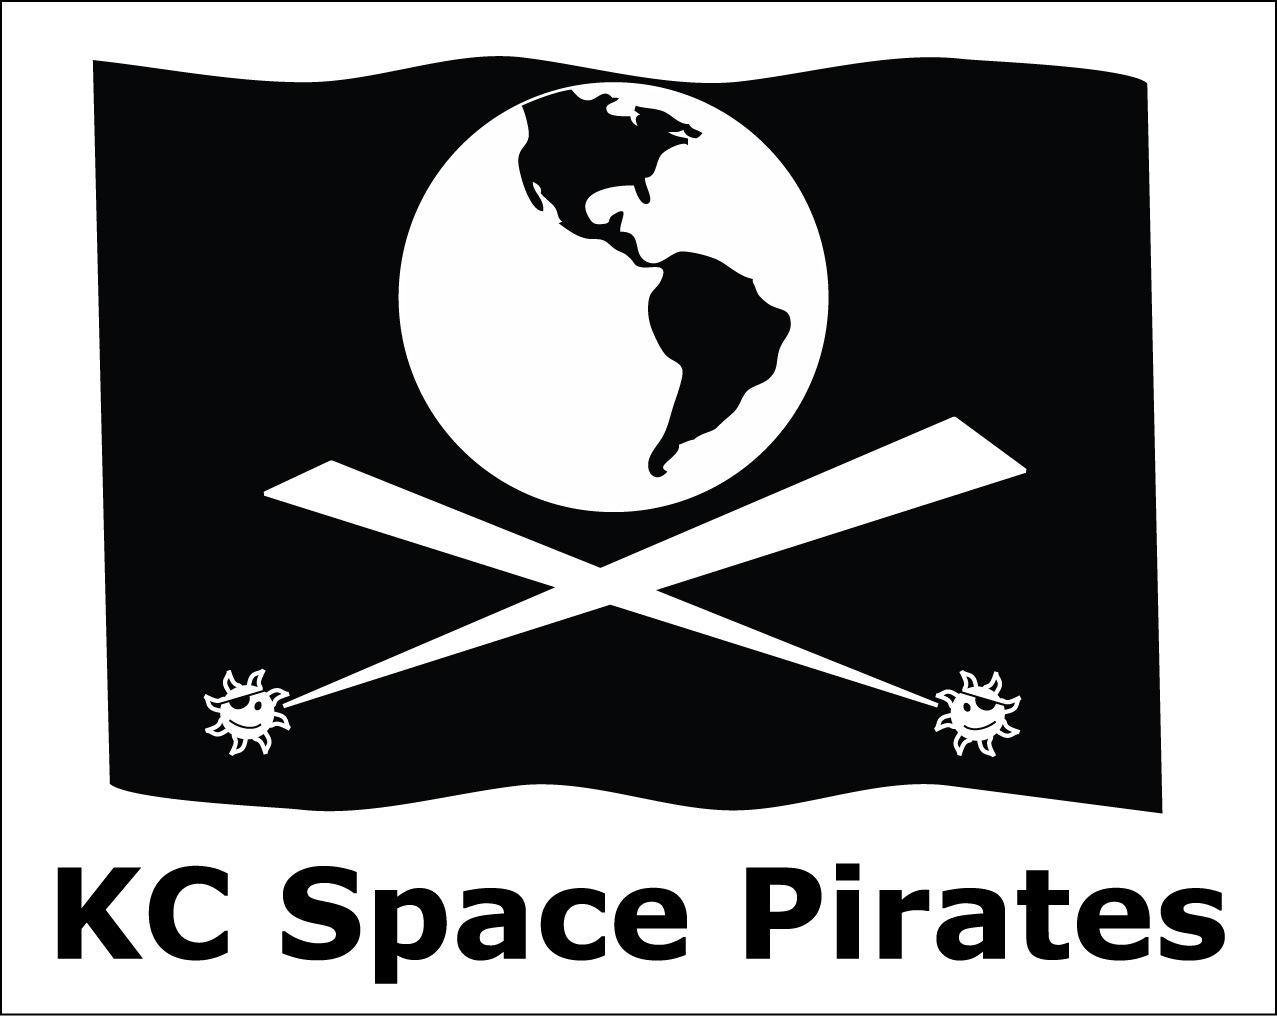 the team logo is a classic black pirate flag with solar beams crossing over under planet earth instead of swords crossing under a skull